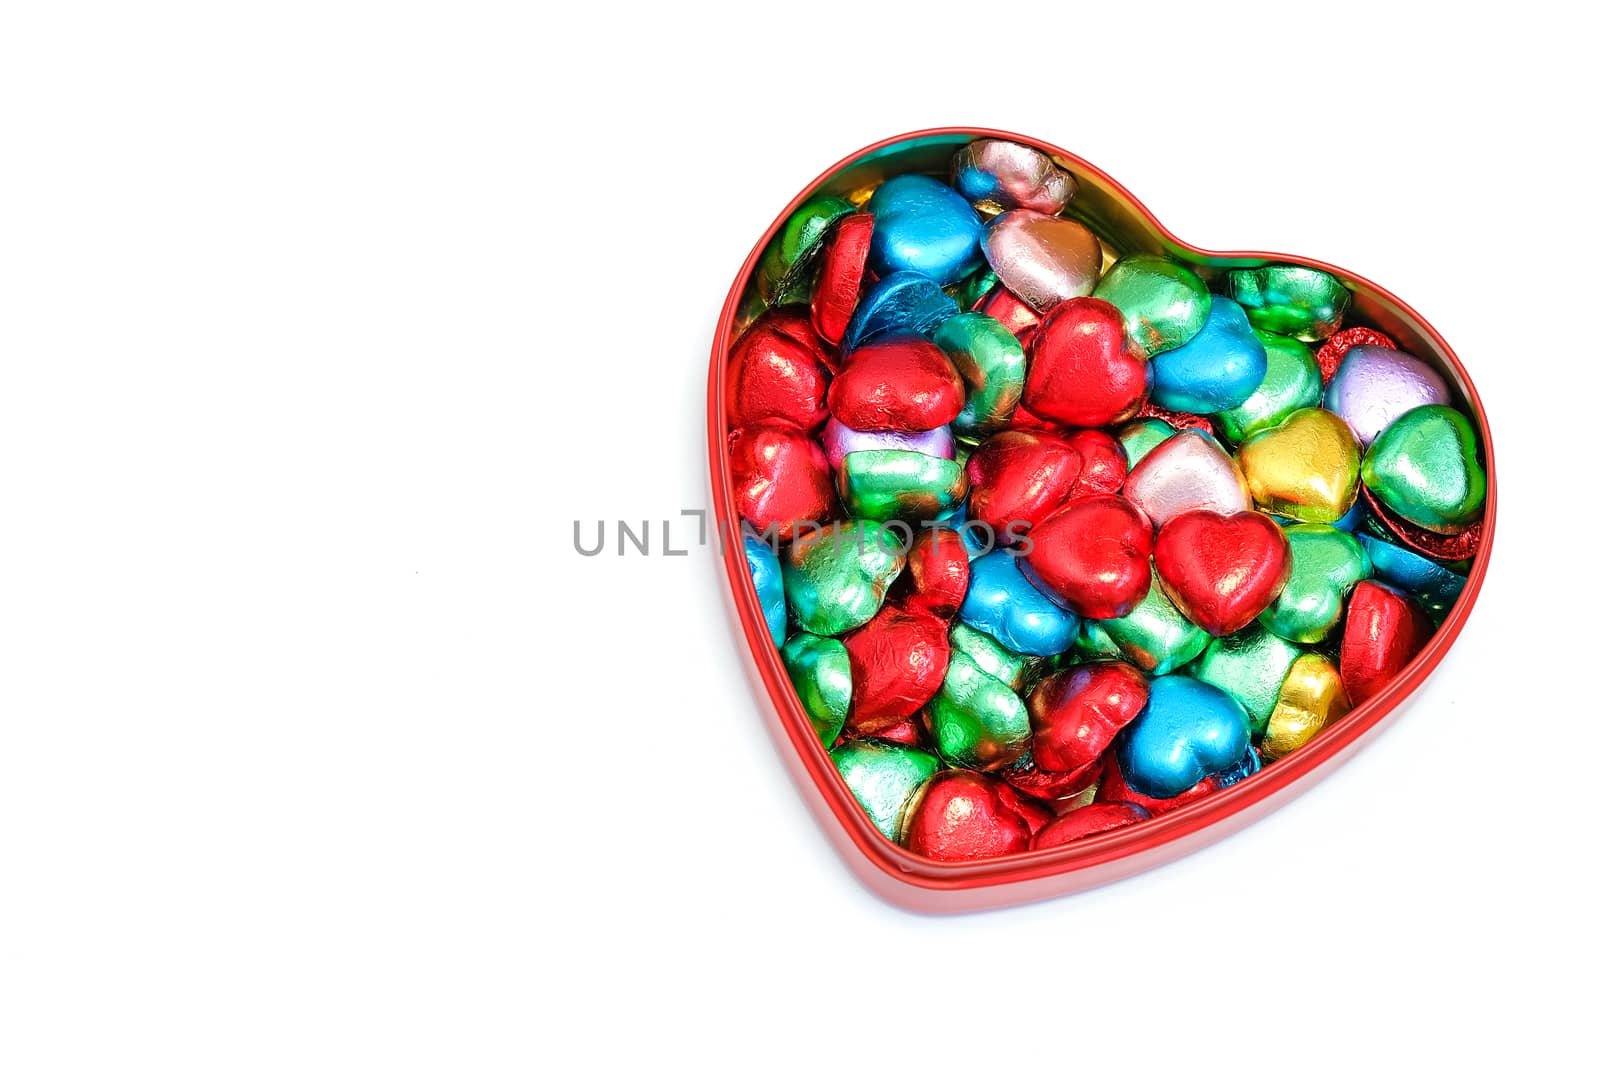 a box of heart-shaped chocolate candies by Nawoot